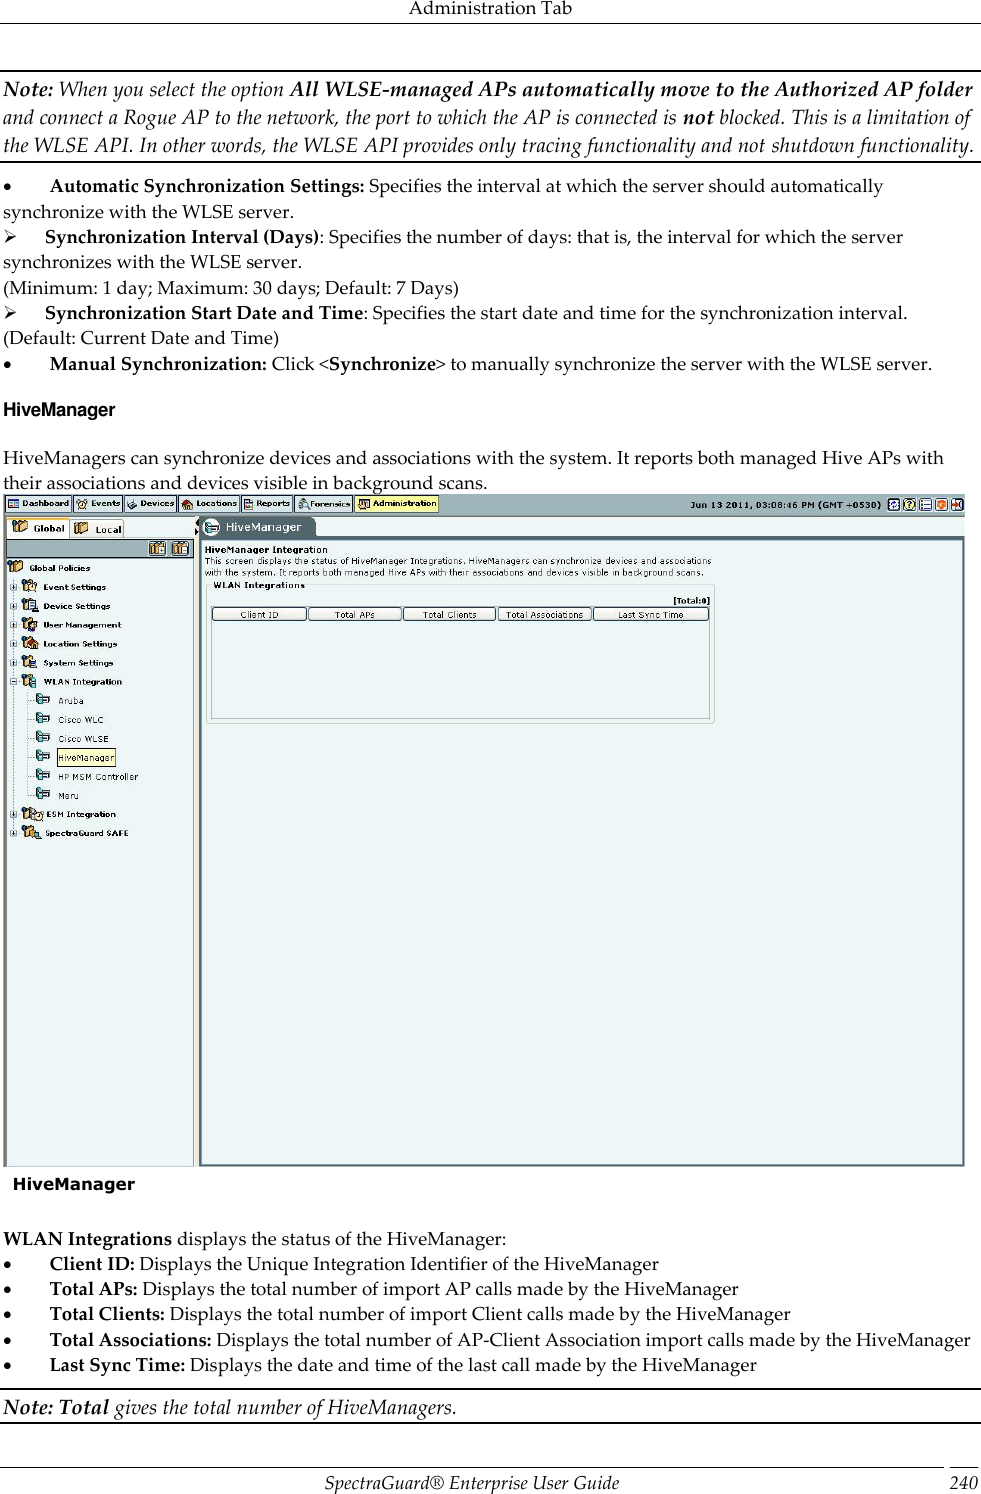 Administration Tab SpectraGuard®  Enterprise User Guide 240 Note: When you select the option All WLSE-managed APs automatically move to the Authorized AP folder and connect a Rogue AP to the network, the port to which the AP is connected is not blocked. This is a limitation of the WLSE API. In other words, the WLSE API provides only tracing functionality and not shutdown functionality.           Automatic Synchronization Settings: Specifies the interval at which the server should automatically synchronize with the WLSE server.        Synchronization Interval (Days): Specifies the number of days: that is, the interval for which the server synchronizes with the WLSE server. (Minimum: 1 day; Maximum: 30 days; Default: 7 Days)        Synchronization Start Date and Time: Specifies the start date and time for the synchronization interval. (Default: Current Date and Time)           Manual Synchronization: Click &lt;Synchronize&gt; to manually synchronize the server with the WLSE server. HiveManager HiveManagers can synchronize devices and associations with the system. It reports both managed Hive APs with their associations and devices visible in background scans.    HiveManager   WLAN Integrations displays the status of the HiveManager:           Client ID: Displays the Unique Integration Identifier of the HiveManager           Total APs: Displays the total number of import AP calls made by the HiveManager           Total Clients: Displays the total number of import Client calls made by the HiveManager           Total Associations: Displays the total number of AP-Client Association import calls made by the HiveManager           Last Sync Time: Displays the date and time of the last call made by the HiveManager Note: Total gives the total number of HiveManagers. 